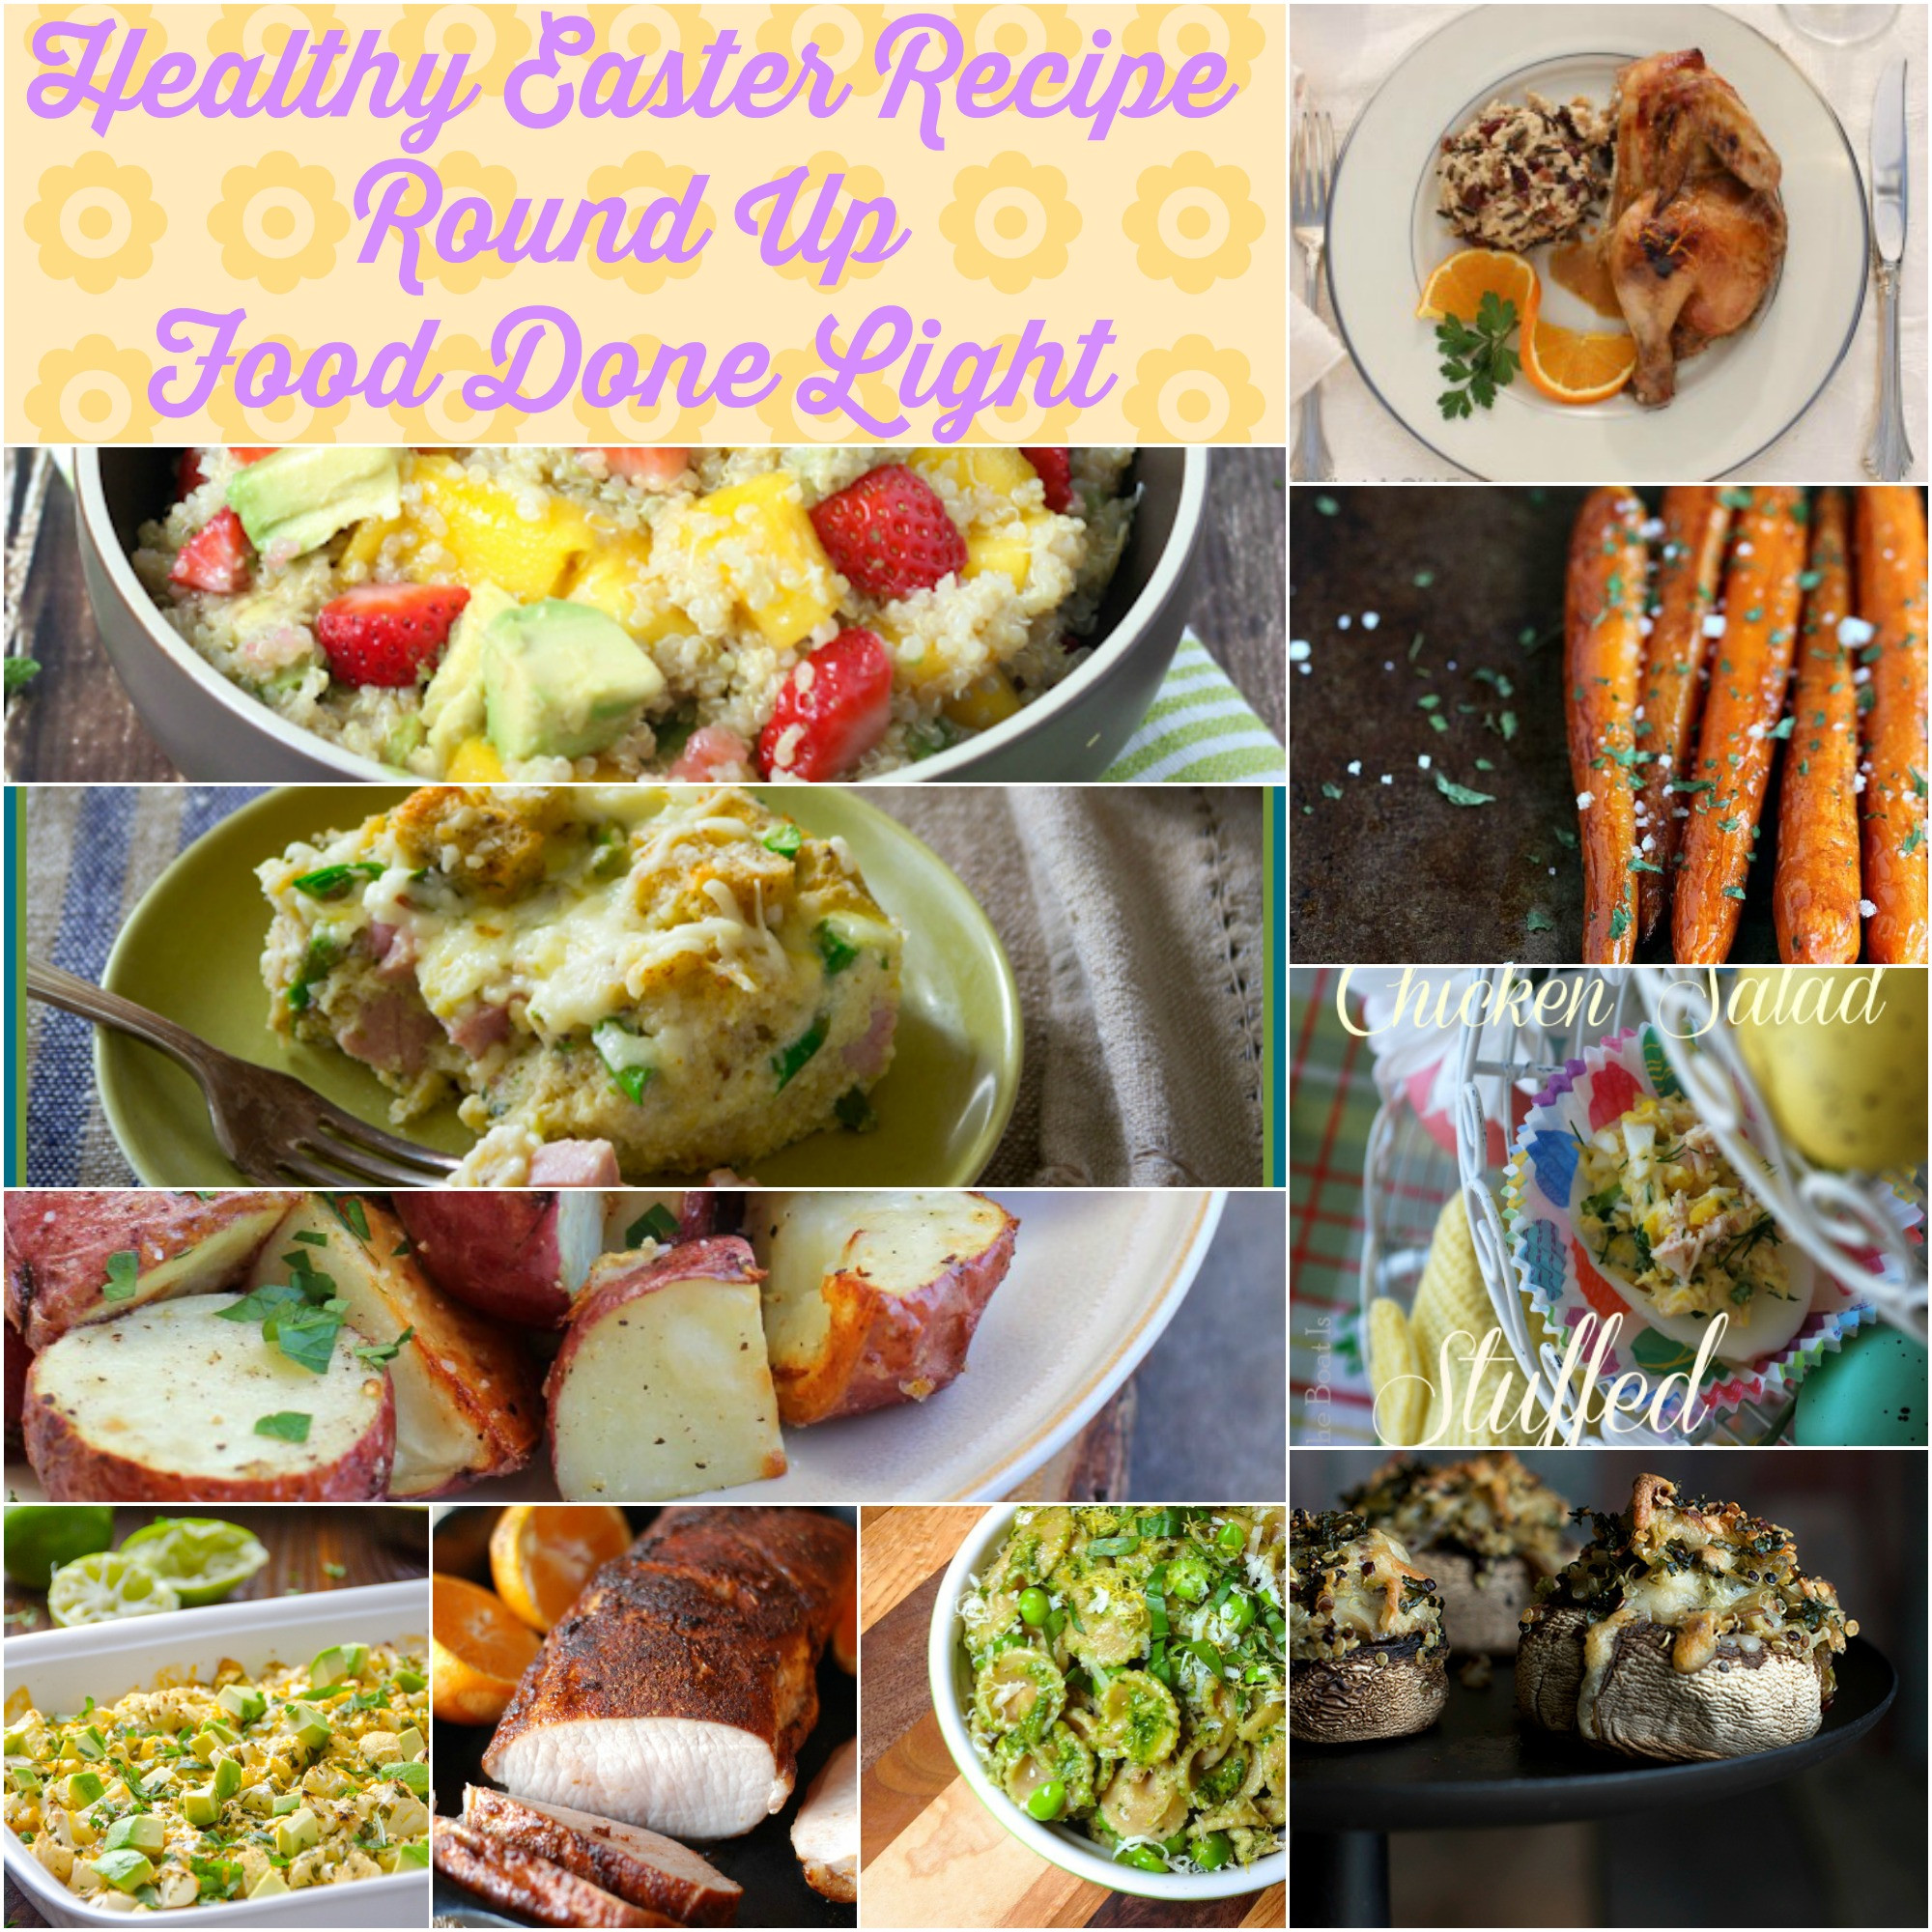 Healthy Easter Dinner
 Healthy Easter Brunch Recipe Round Up Food Done Light